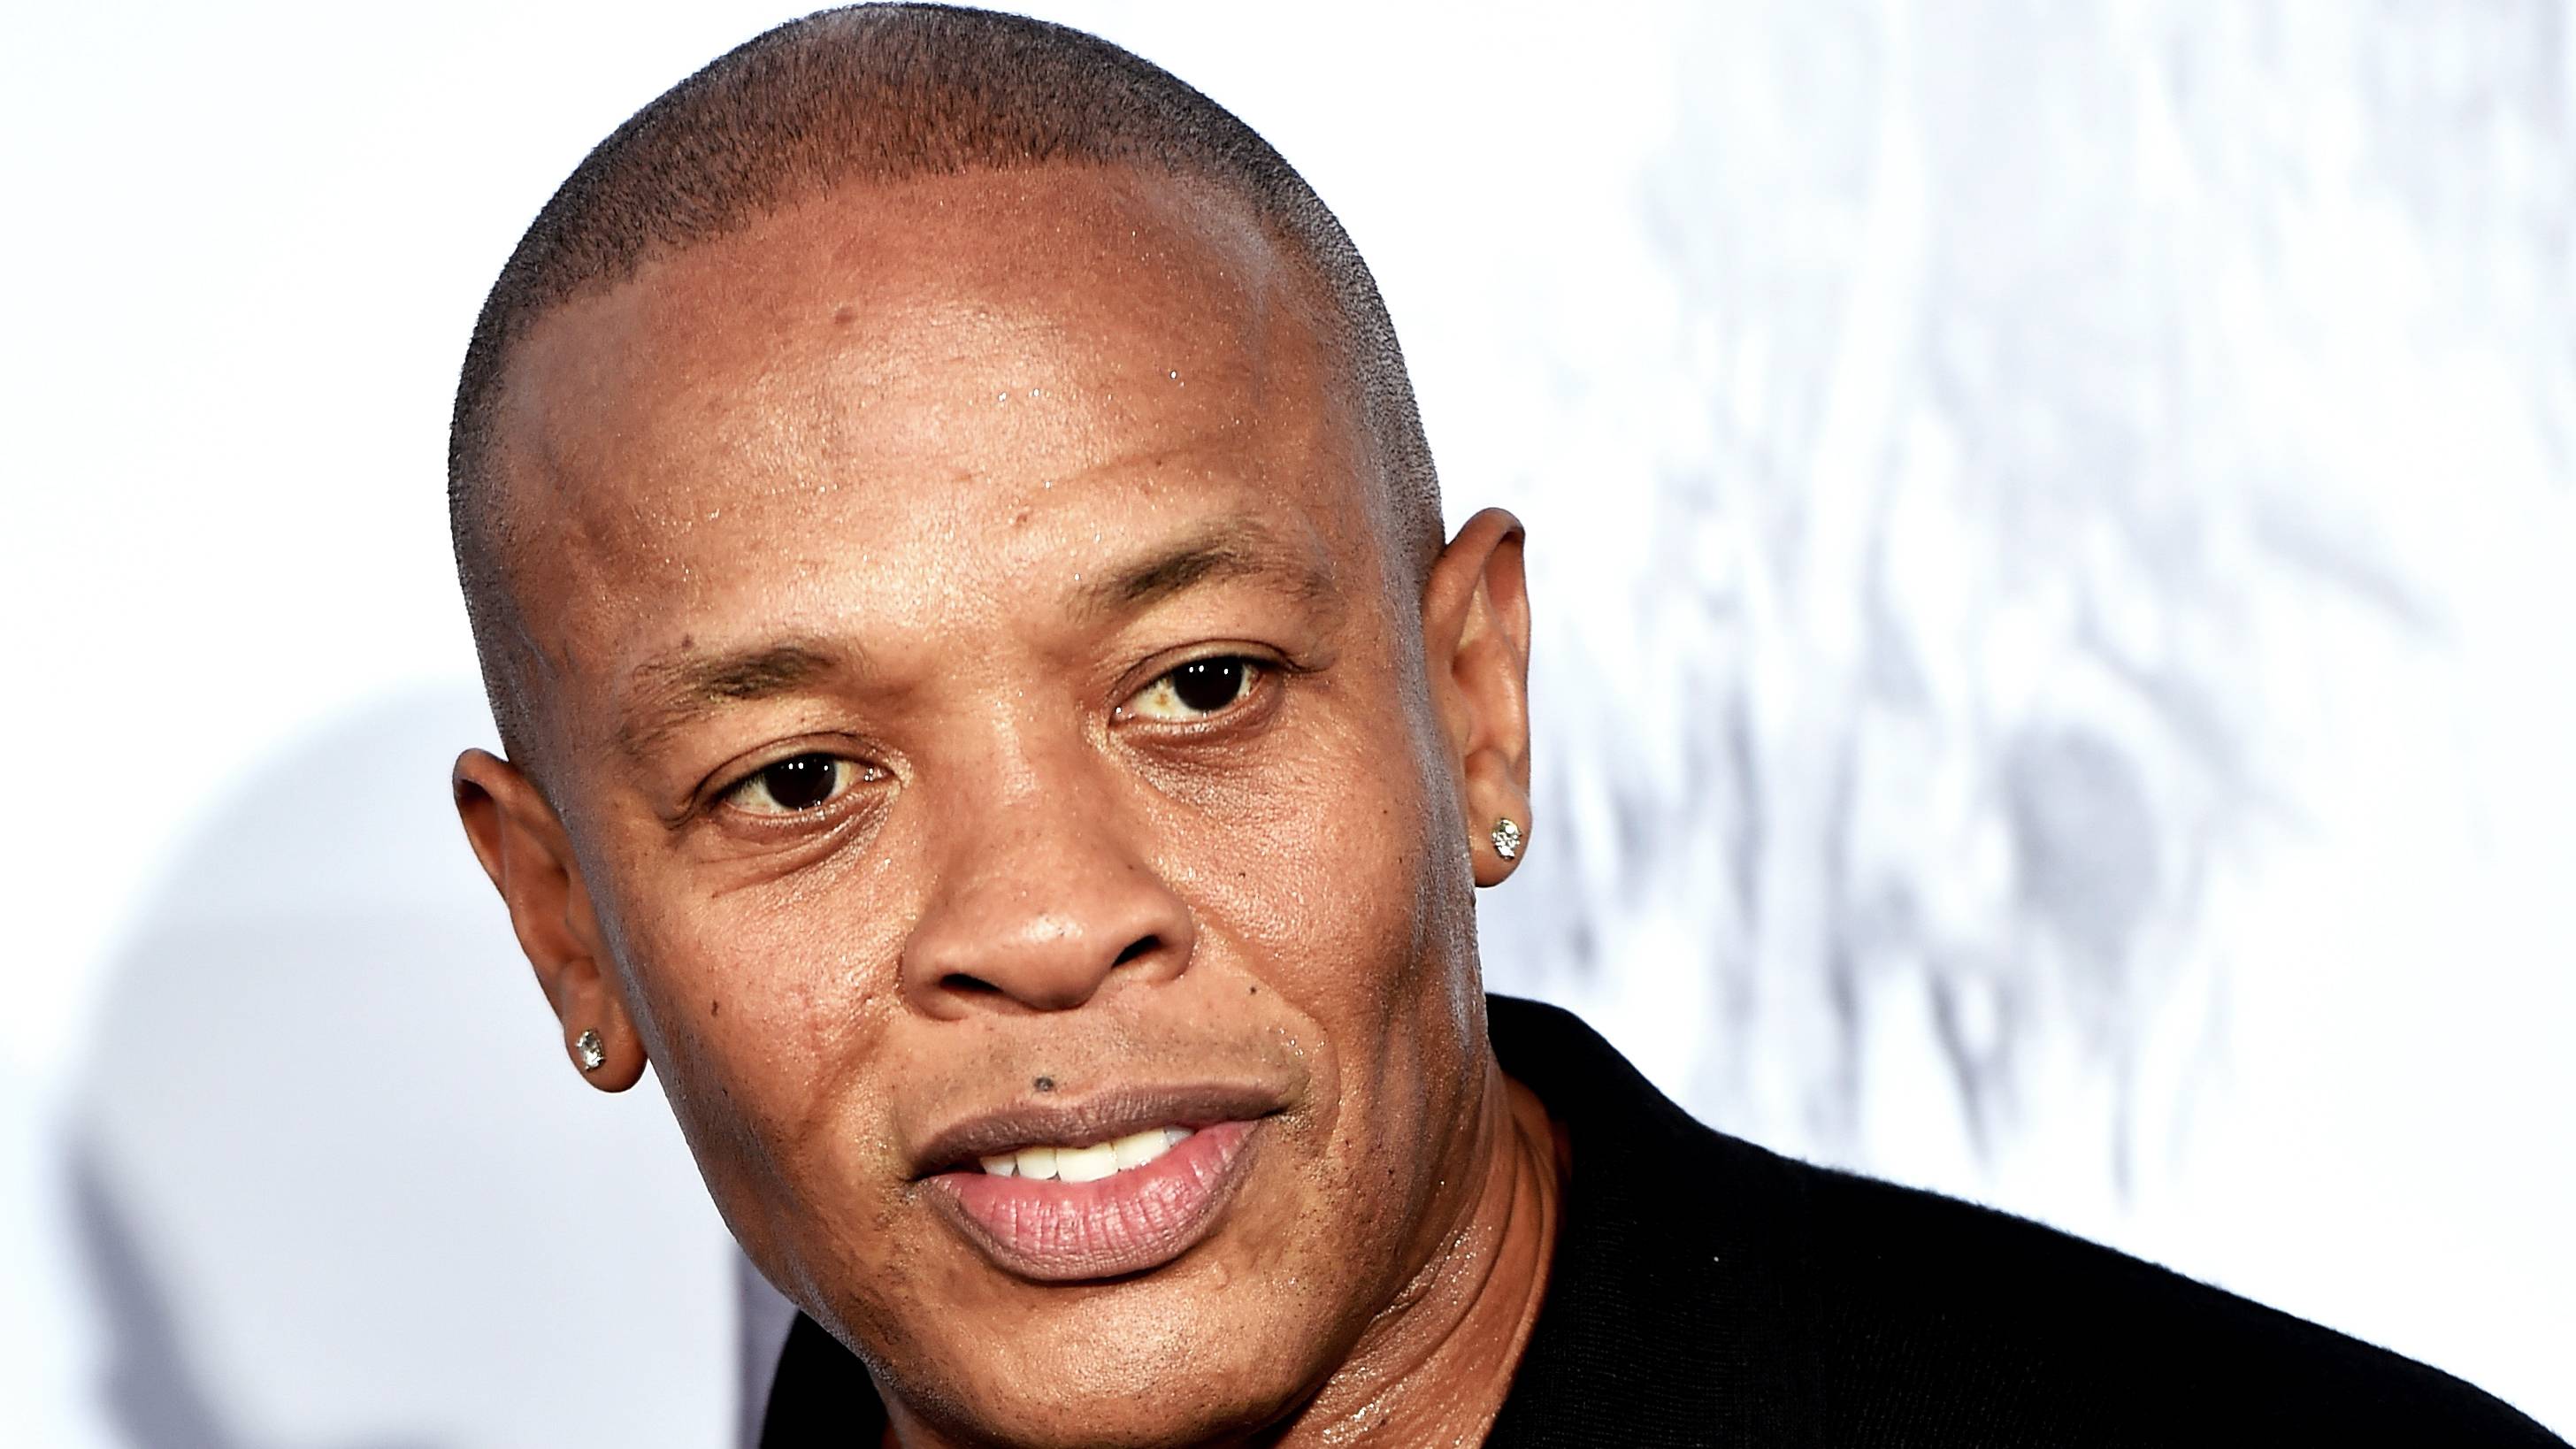 Happy Dre Day! - Only someone like Dr. Dre can have us wait 15 years for an album and suffer no backlash. Detox, anyone? After all, Dr. Dre has never been just a rapper, having started off as a DJ turned producer, he’s proven over the years that you don’t box the good doctor in.Even with such brilliance in the hip hop arena, Dre has dabbled outside of it. To commemorate his 51st birthday, check out the moments he “left” hip hop for just a few seconds to bestow his talents elsewhere. — Jon Reyes&nbsp;(Photo:&nbsp;Kevin Winter/Getty Images)